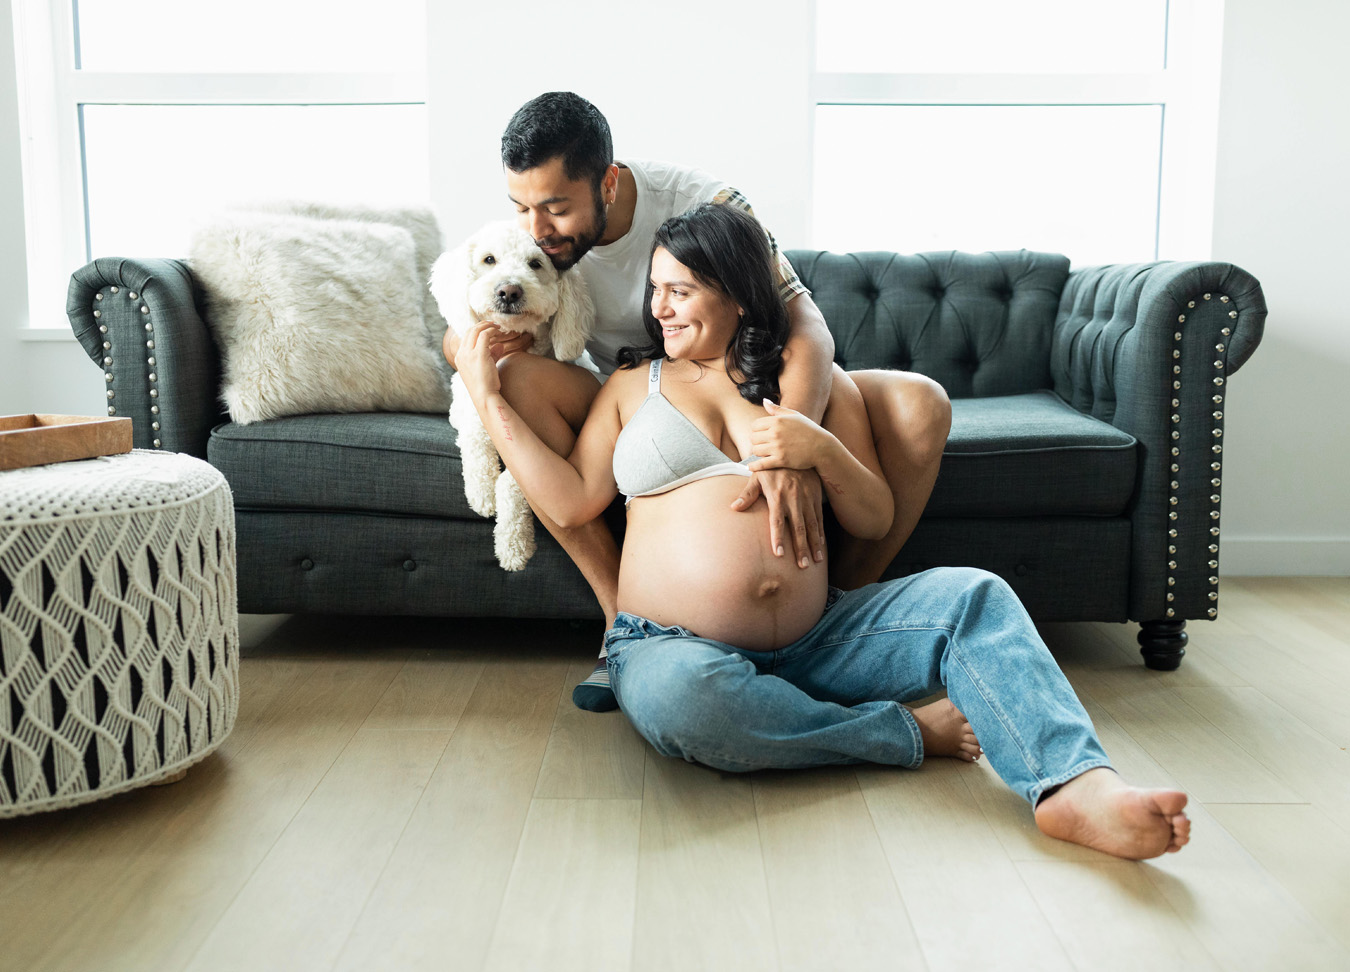 Pregnant woman sitting on the floor with a man and a dog sitting on the couch above her